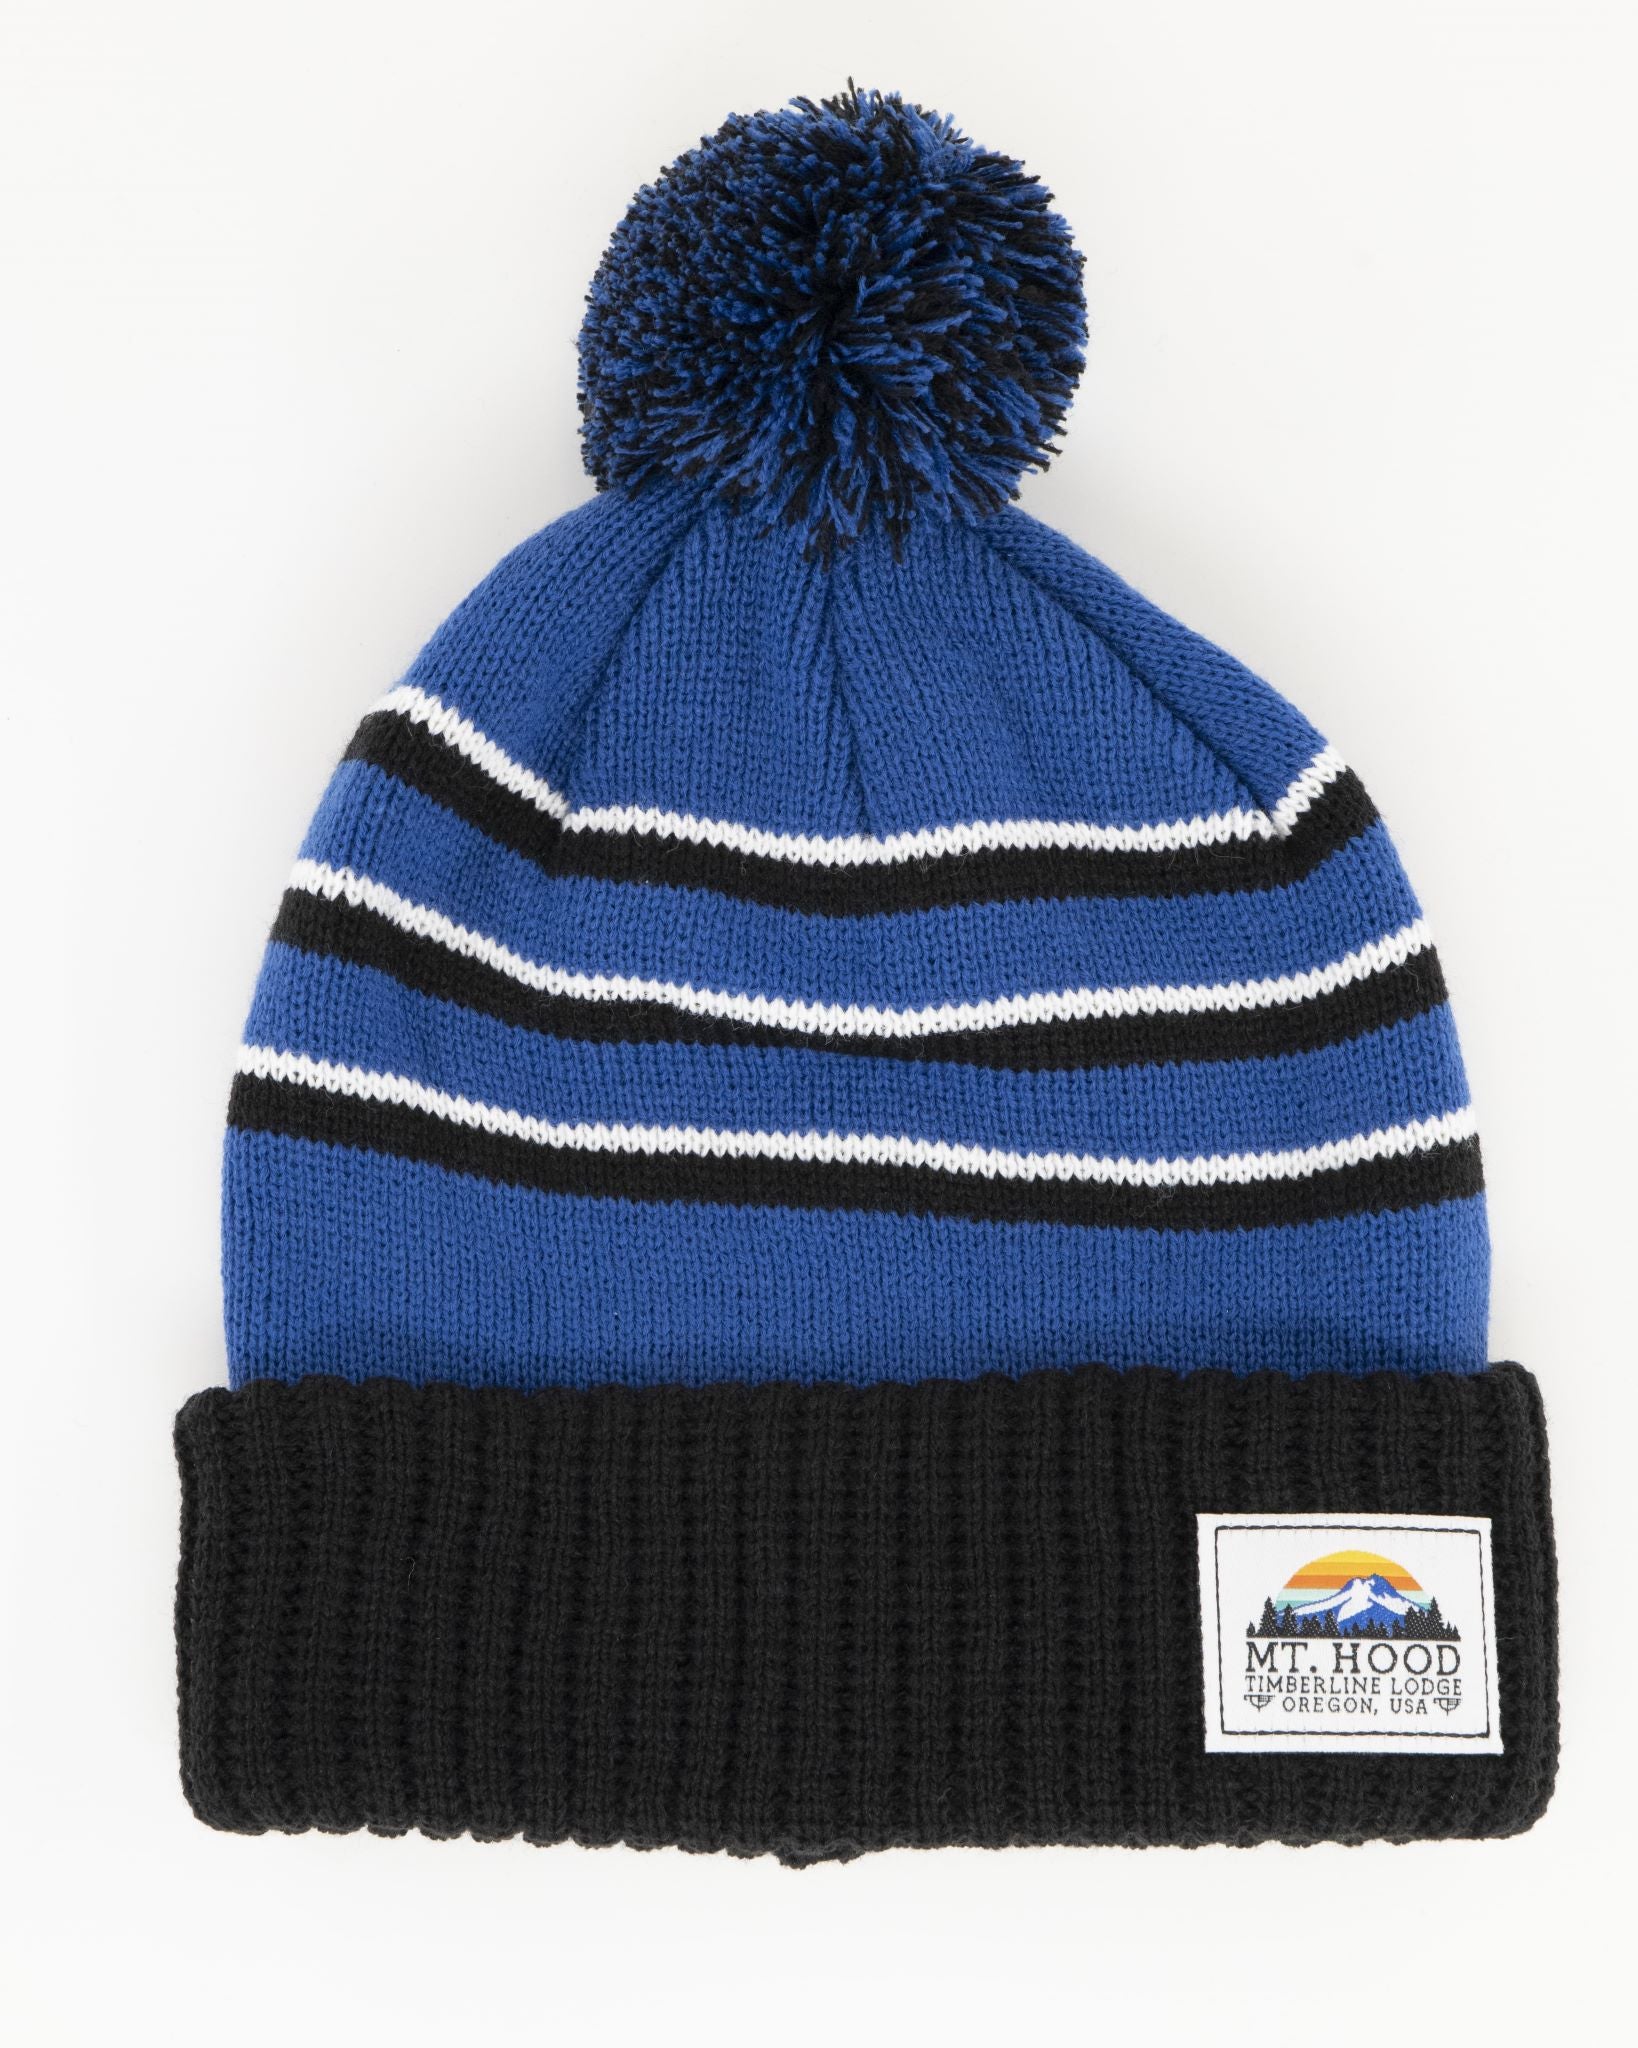 - Online in Timberline Lodge and White Grey, Pom B Black, - Store Beanie Daybreak Blue, Available or -